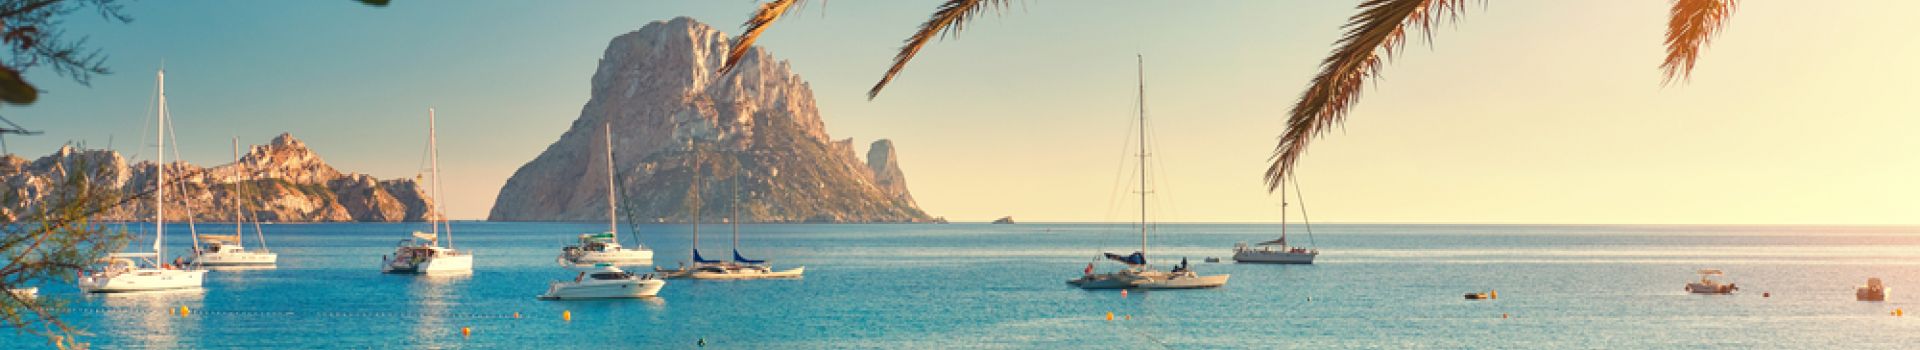 Cheap holidays to Ibiza from Belfast - Cassidy Travel